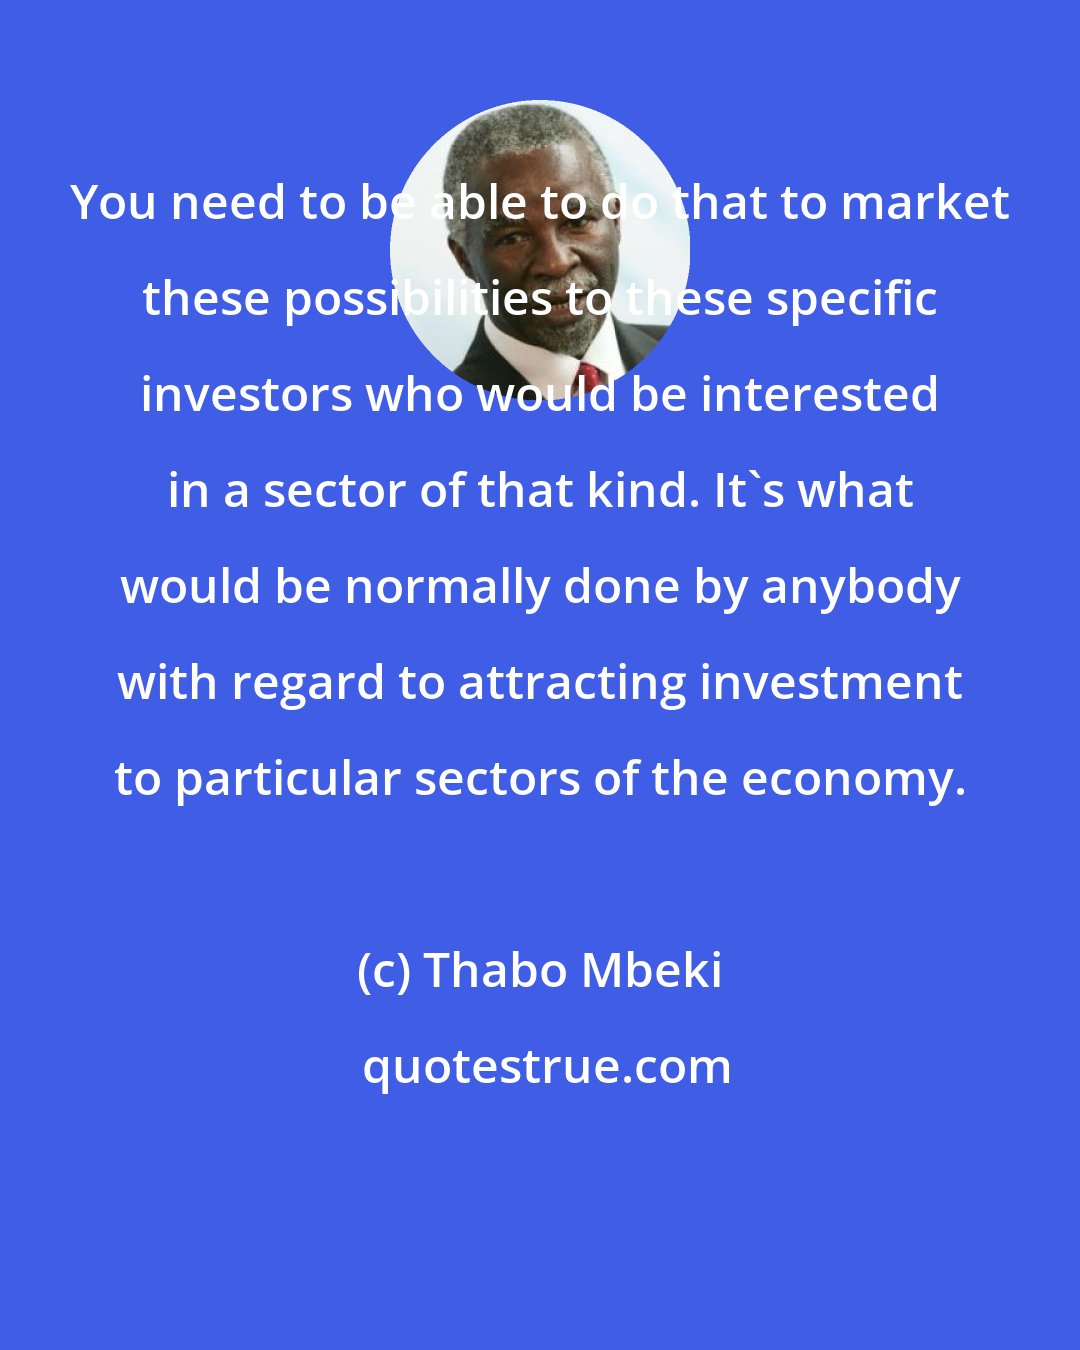 Thabo Mbeki: You need to be able to do that to market these possibilities to these specific investors who would be interested in a sector of that kind. It's what would be normally done by anybody with regard to attracting investment to particular sectors of the economy.